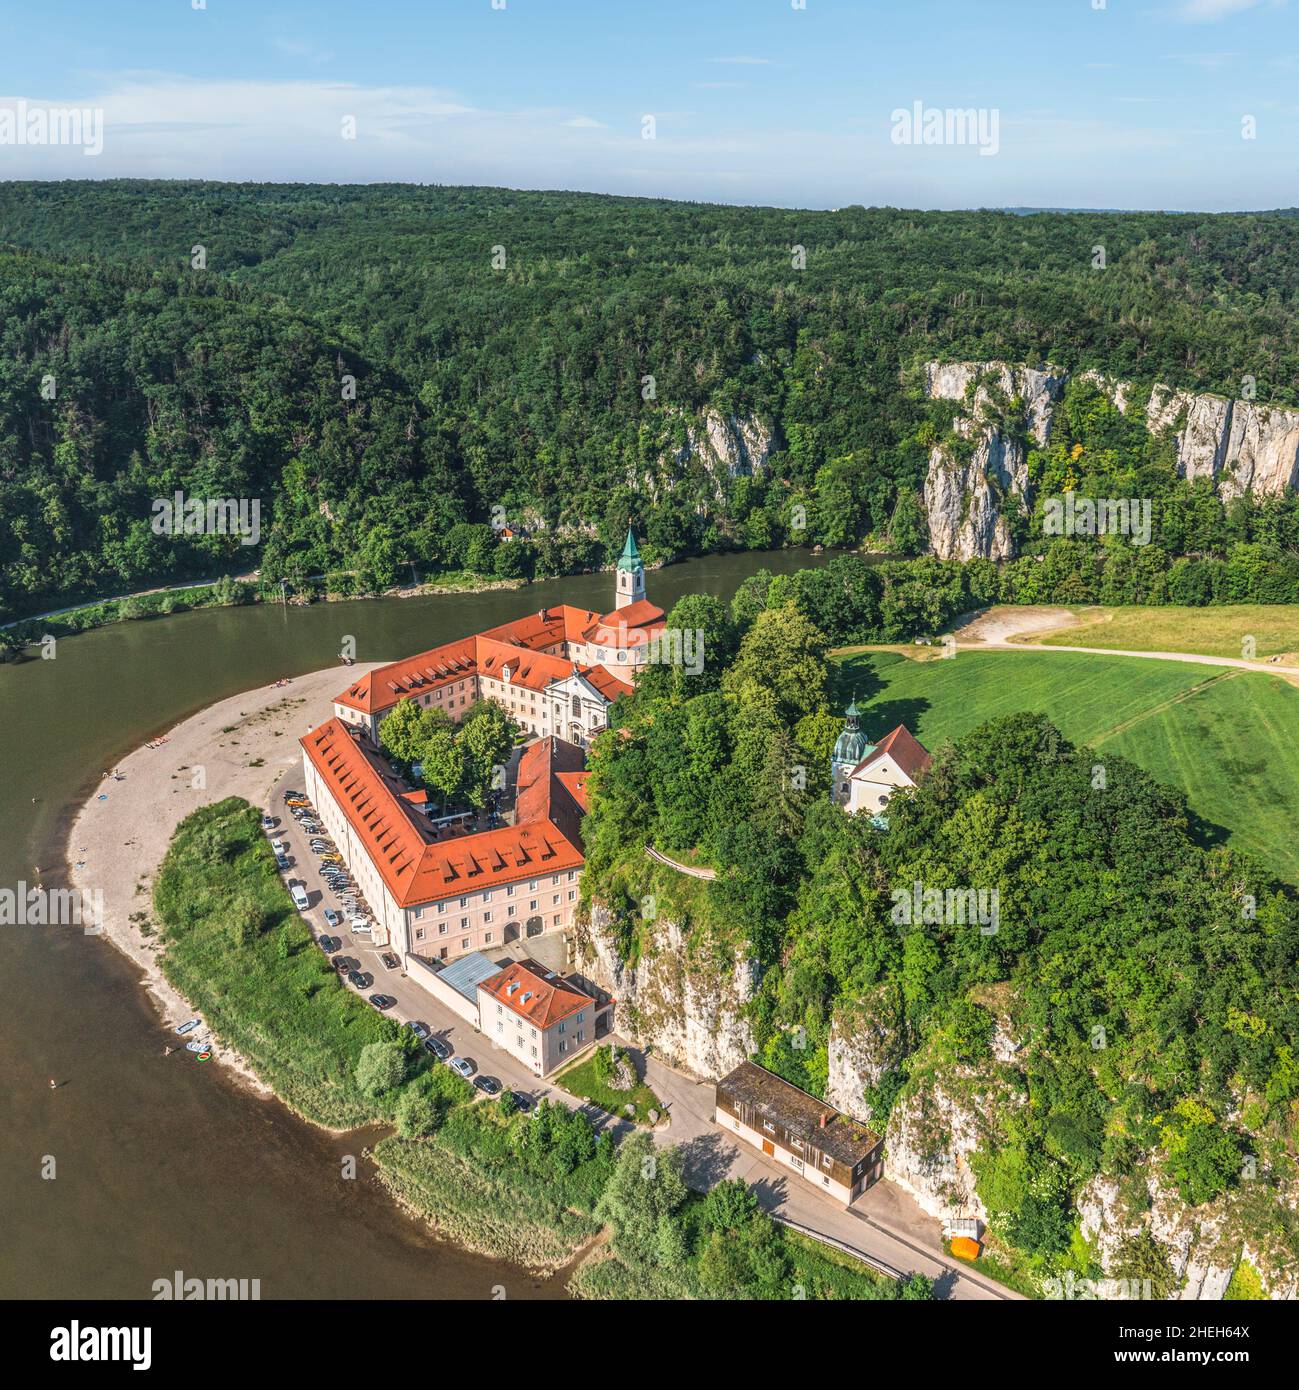 Impressive aerial views to Danube valley and gorge near monastery of Weltenburg Stock Photo